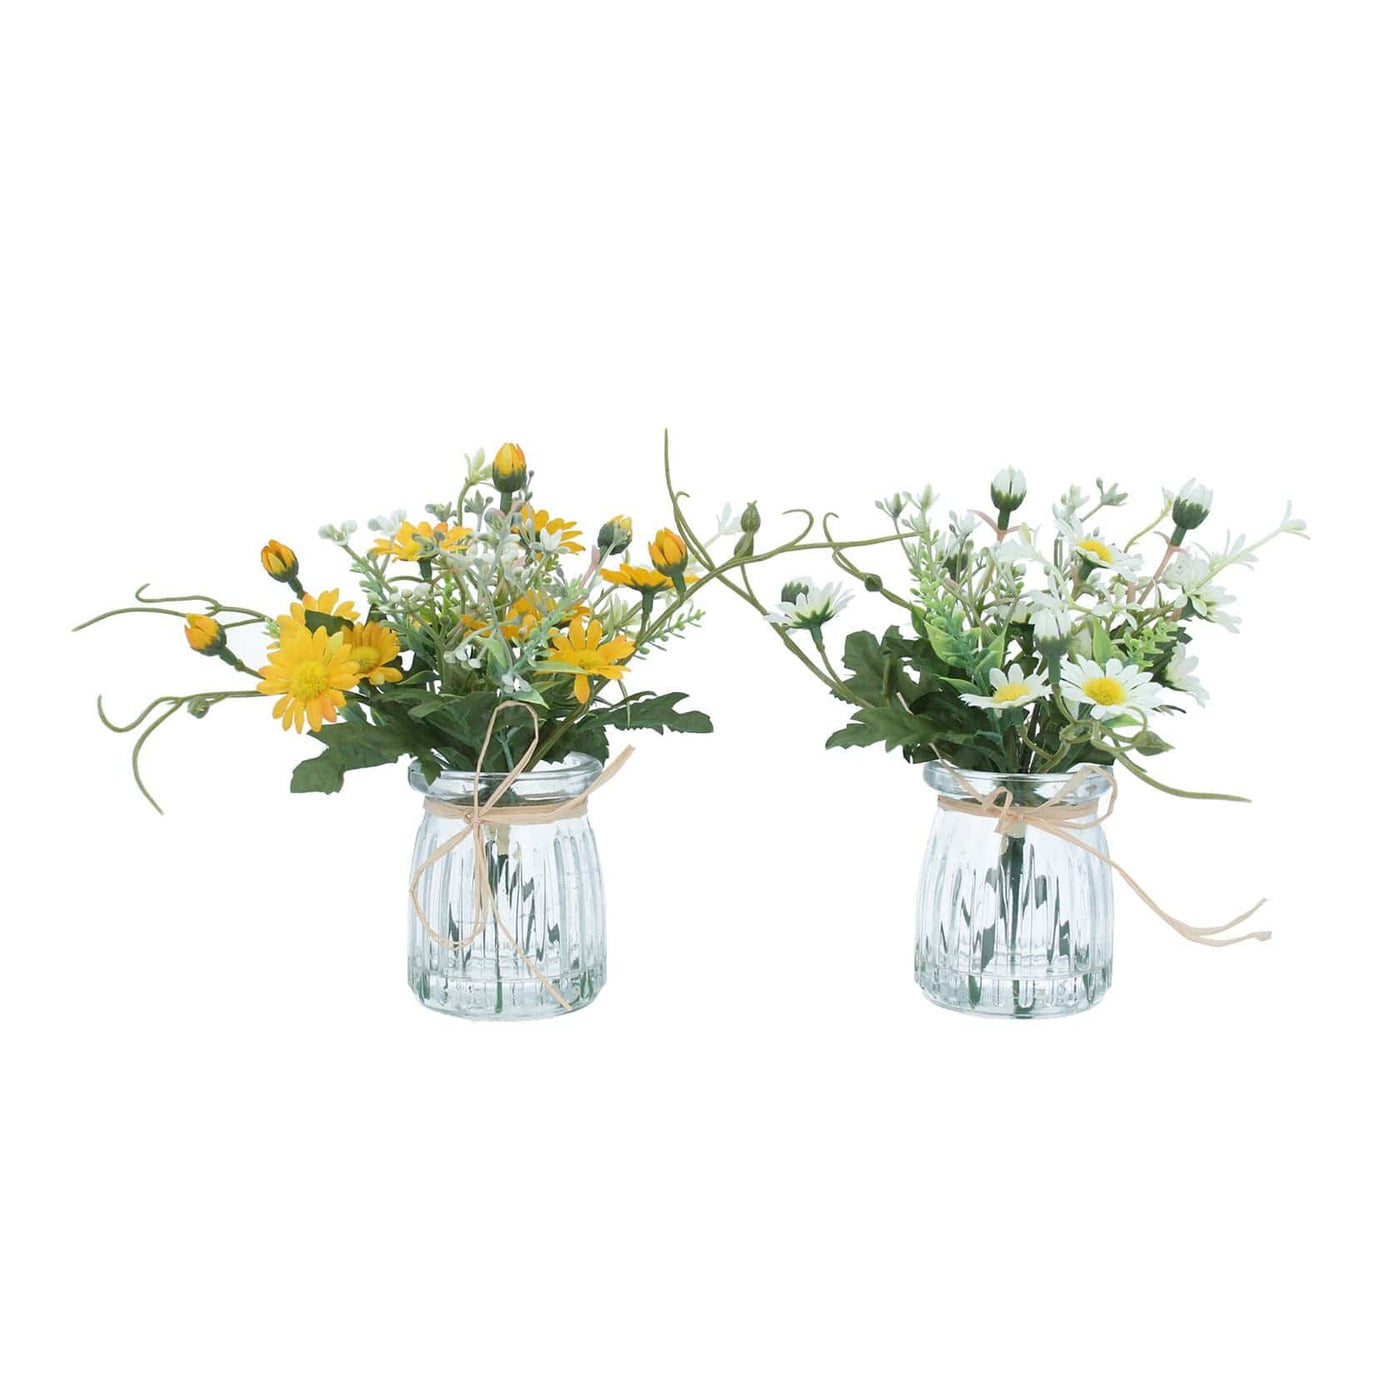 Gisela Graham Easter Home accessories Set of 2 Dandelion and Daisy Flower Pots